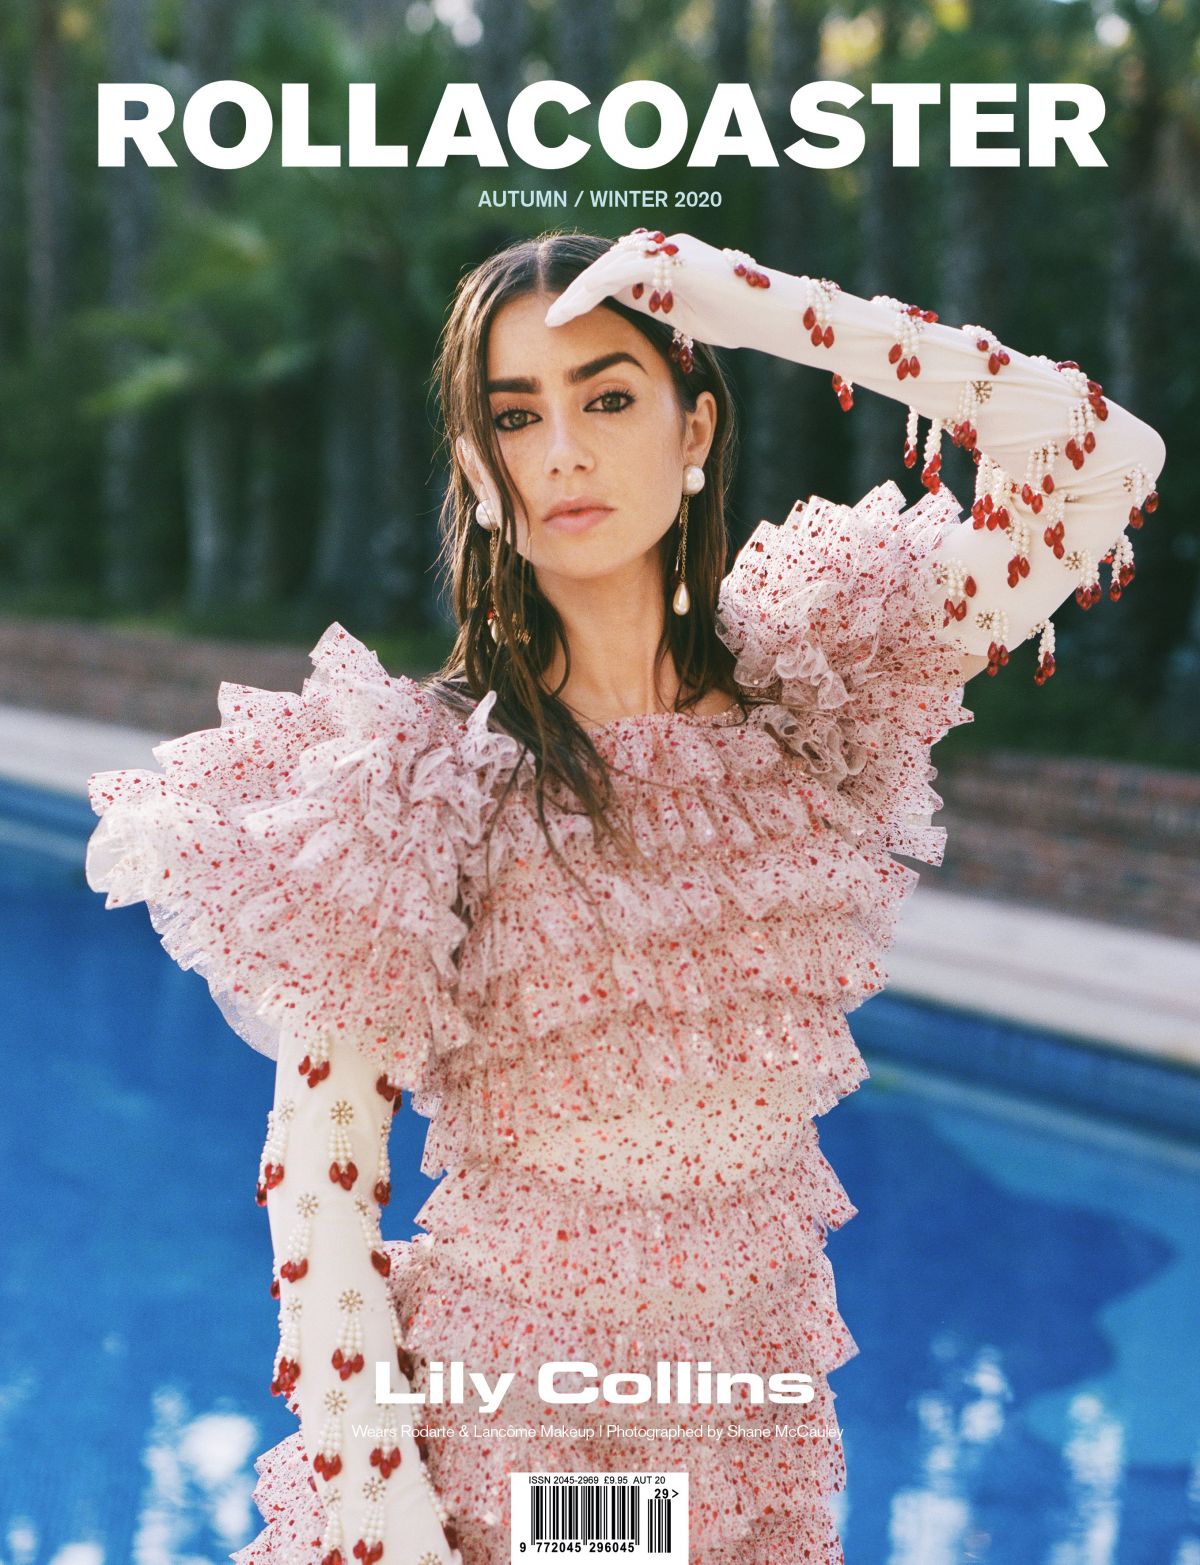 lily-collins-on-the-cover-o-rollacoaster-magazine-fall-winter-2020-0.jpg